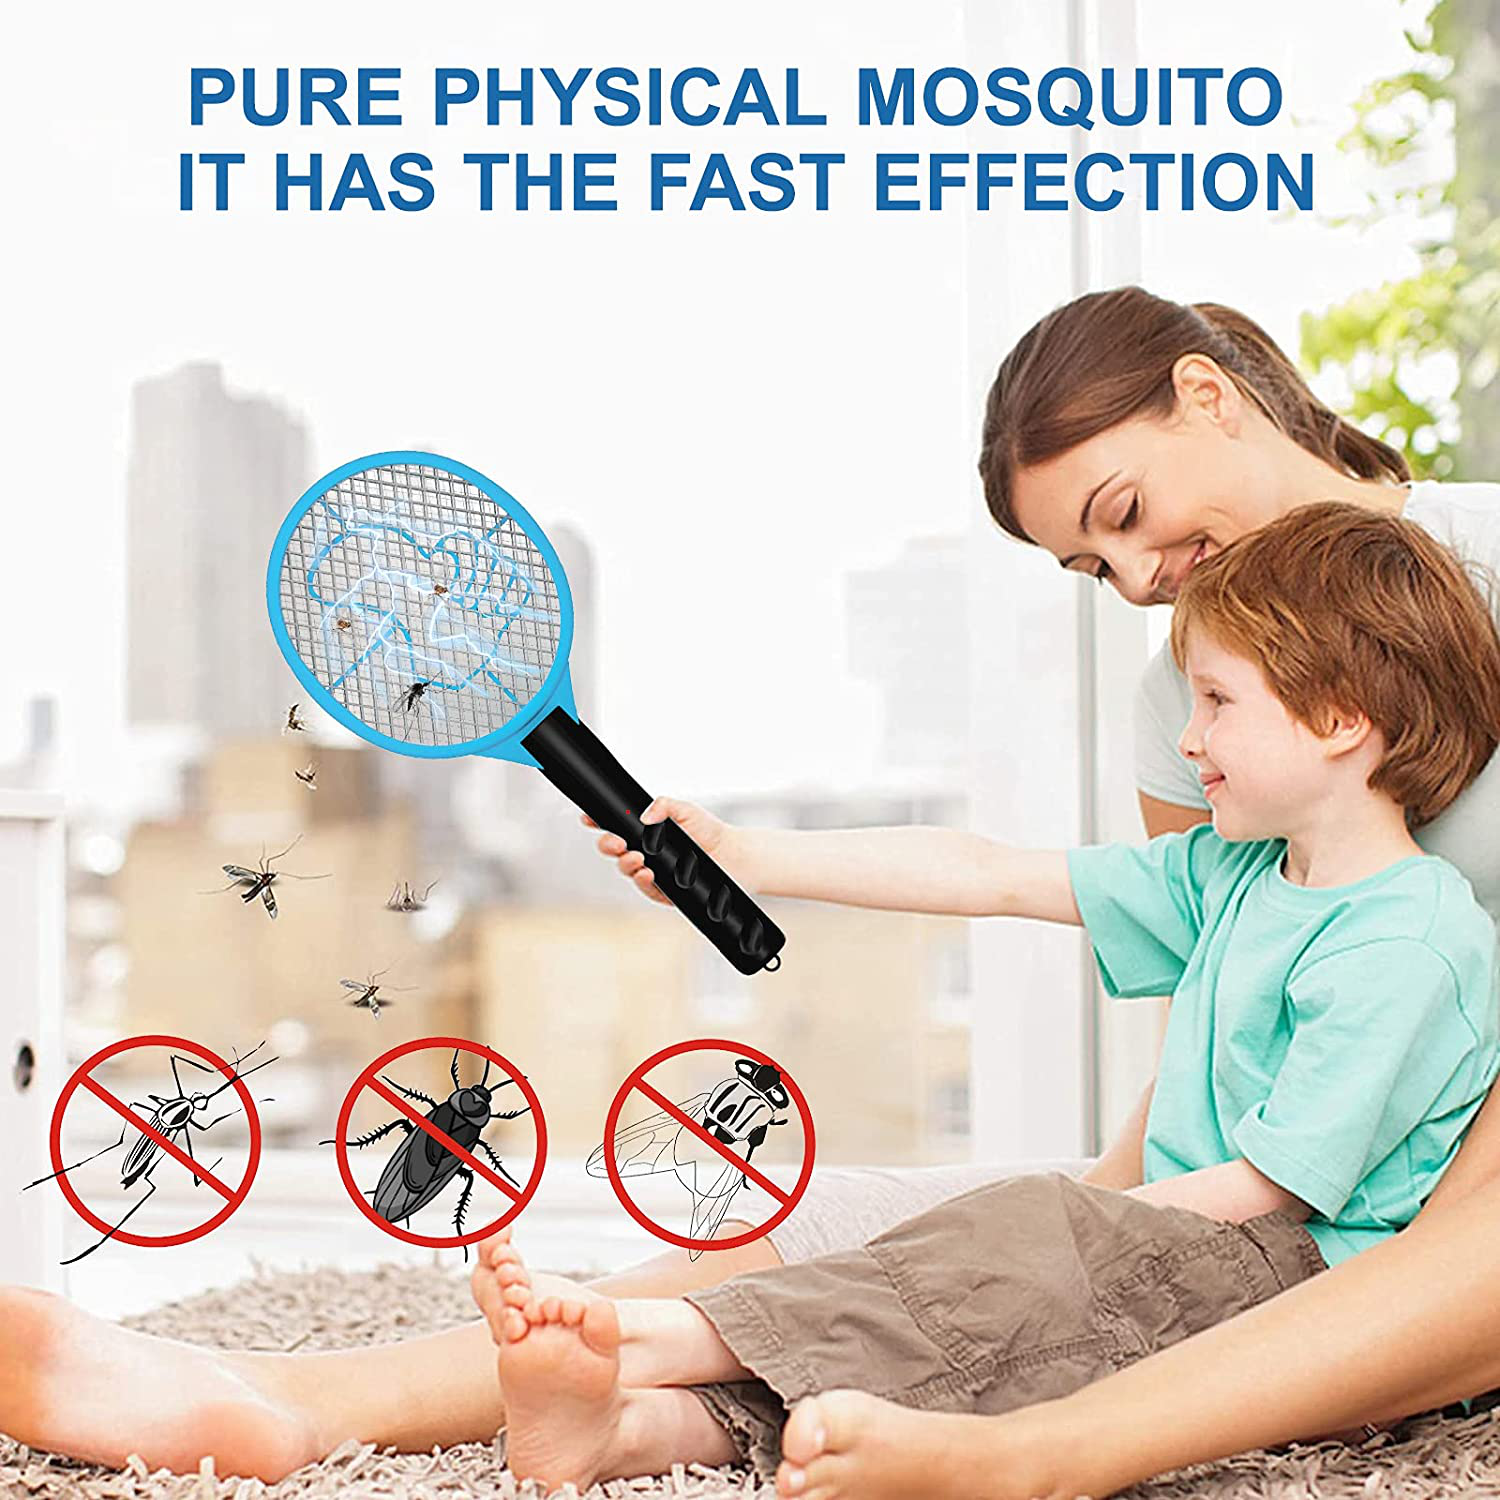 Bug Zapper Fly Racket Swatter Electric Mosquito Killer for Indoor and Outdoor, High Voltage Mesh, 3 Safe Layer Fly Moth Insect Killer Pest Trap Control, Handheld, Safe to Use, Blue & Black